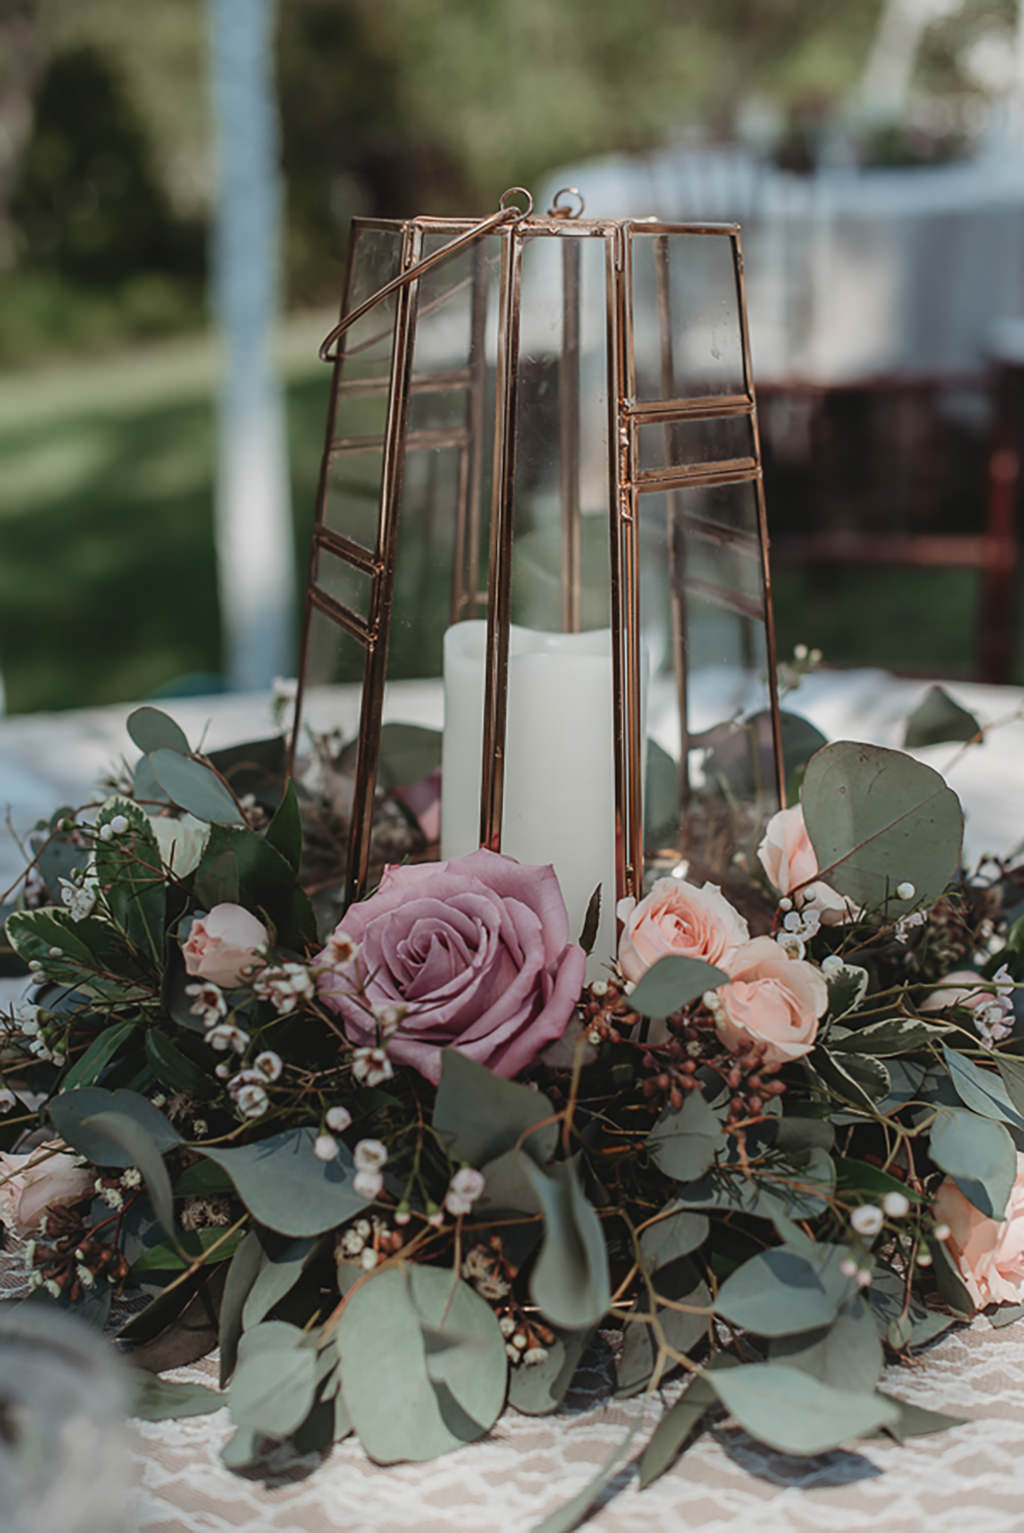 Garden Inspired Wedding Reception Decor, Glass Geometric Vase with Candle, Dusty Pink, Blush Pink and Greenery Floral Centerpiece